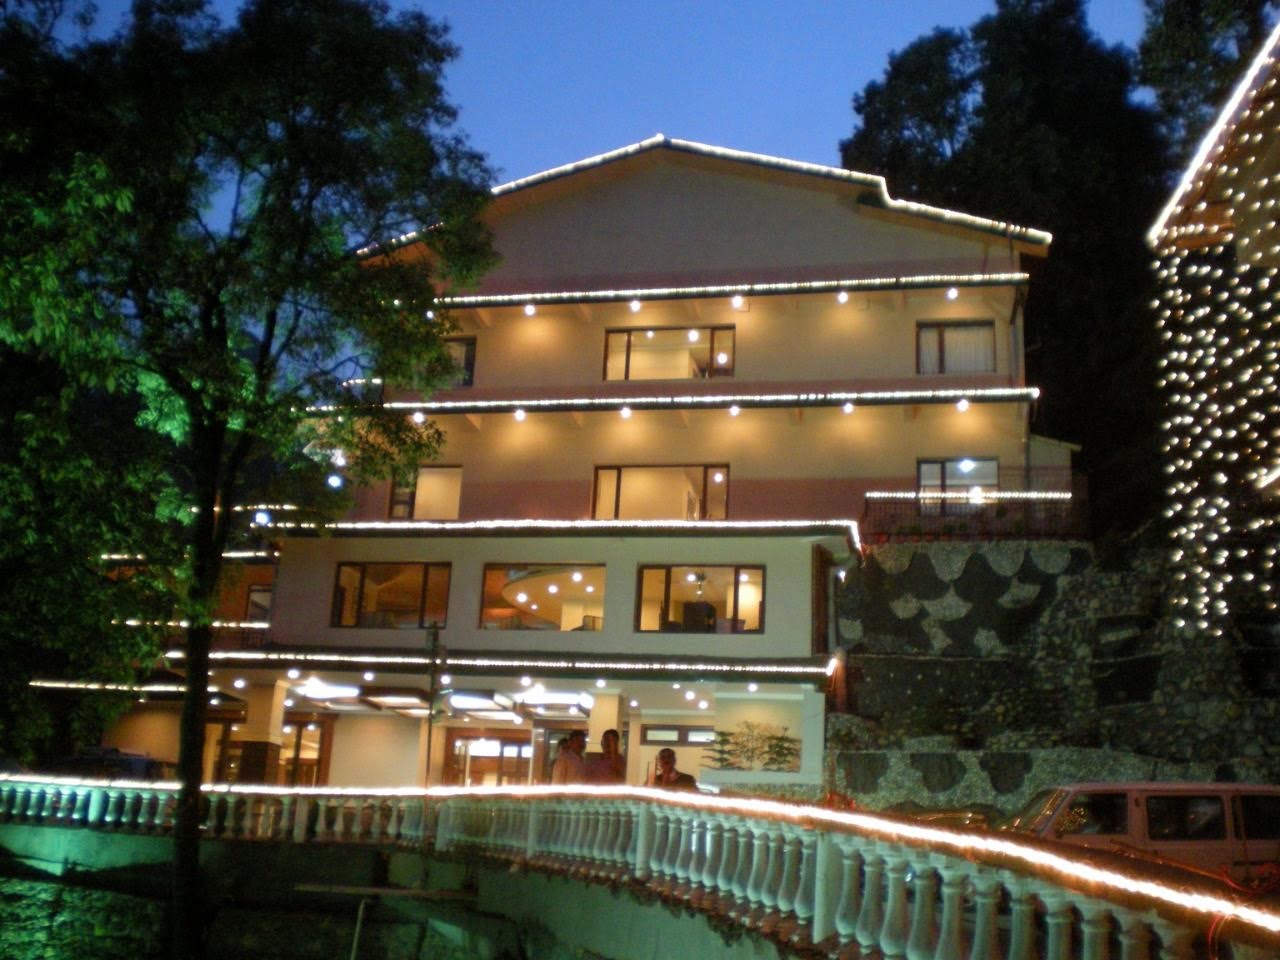 Sarovar Hotels and Resorts open their doors in Mussoorie with Madhuban Sarovar Portico